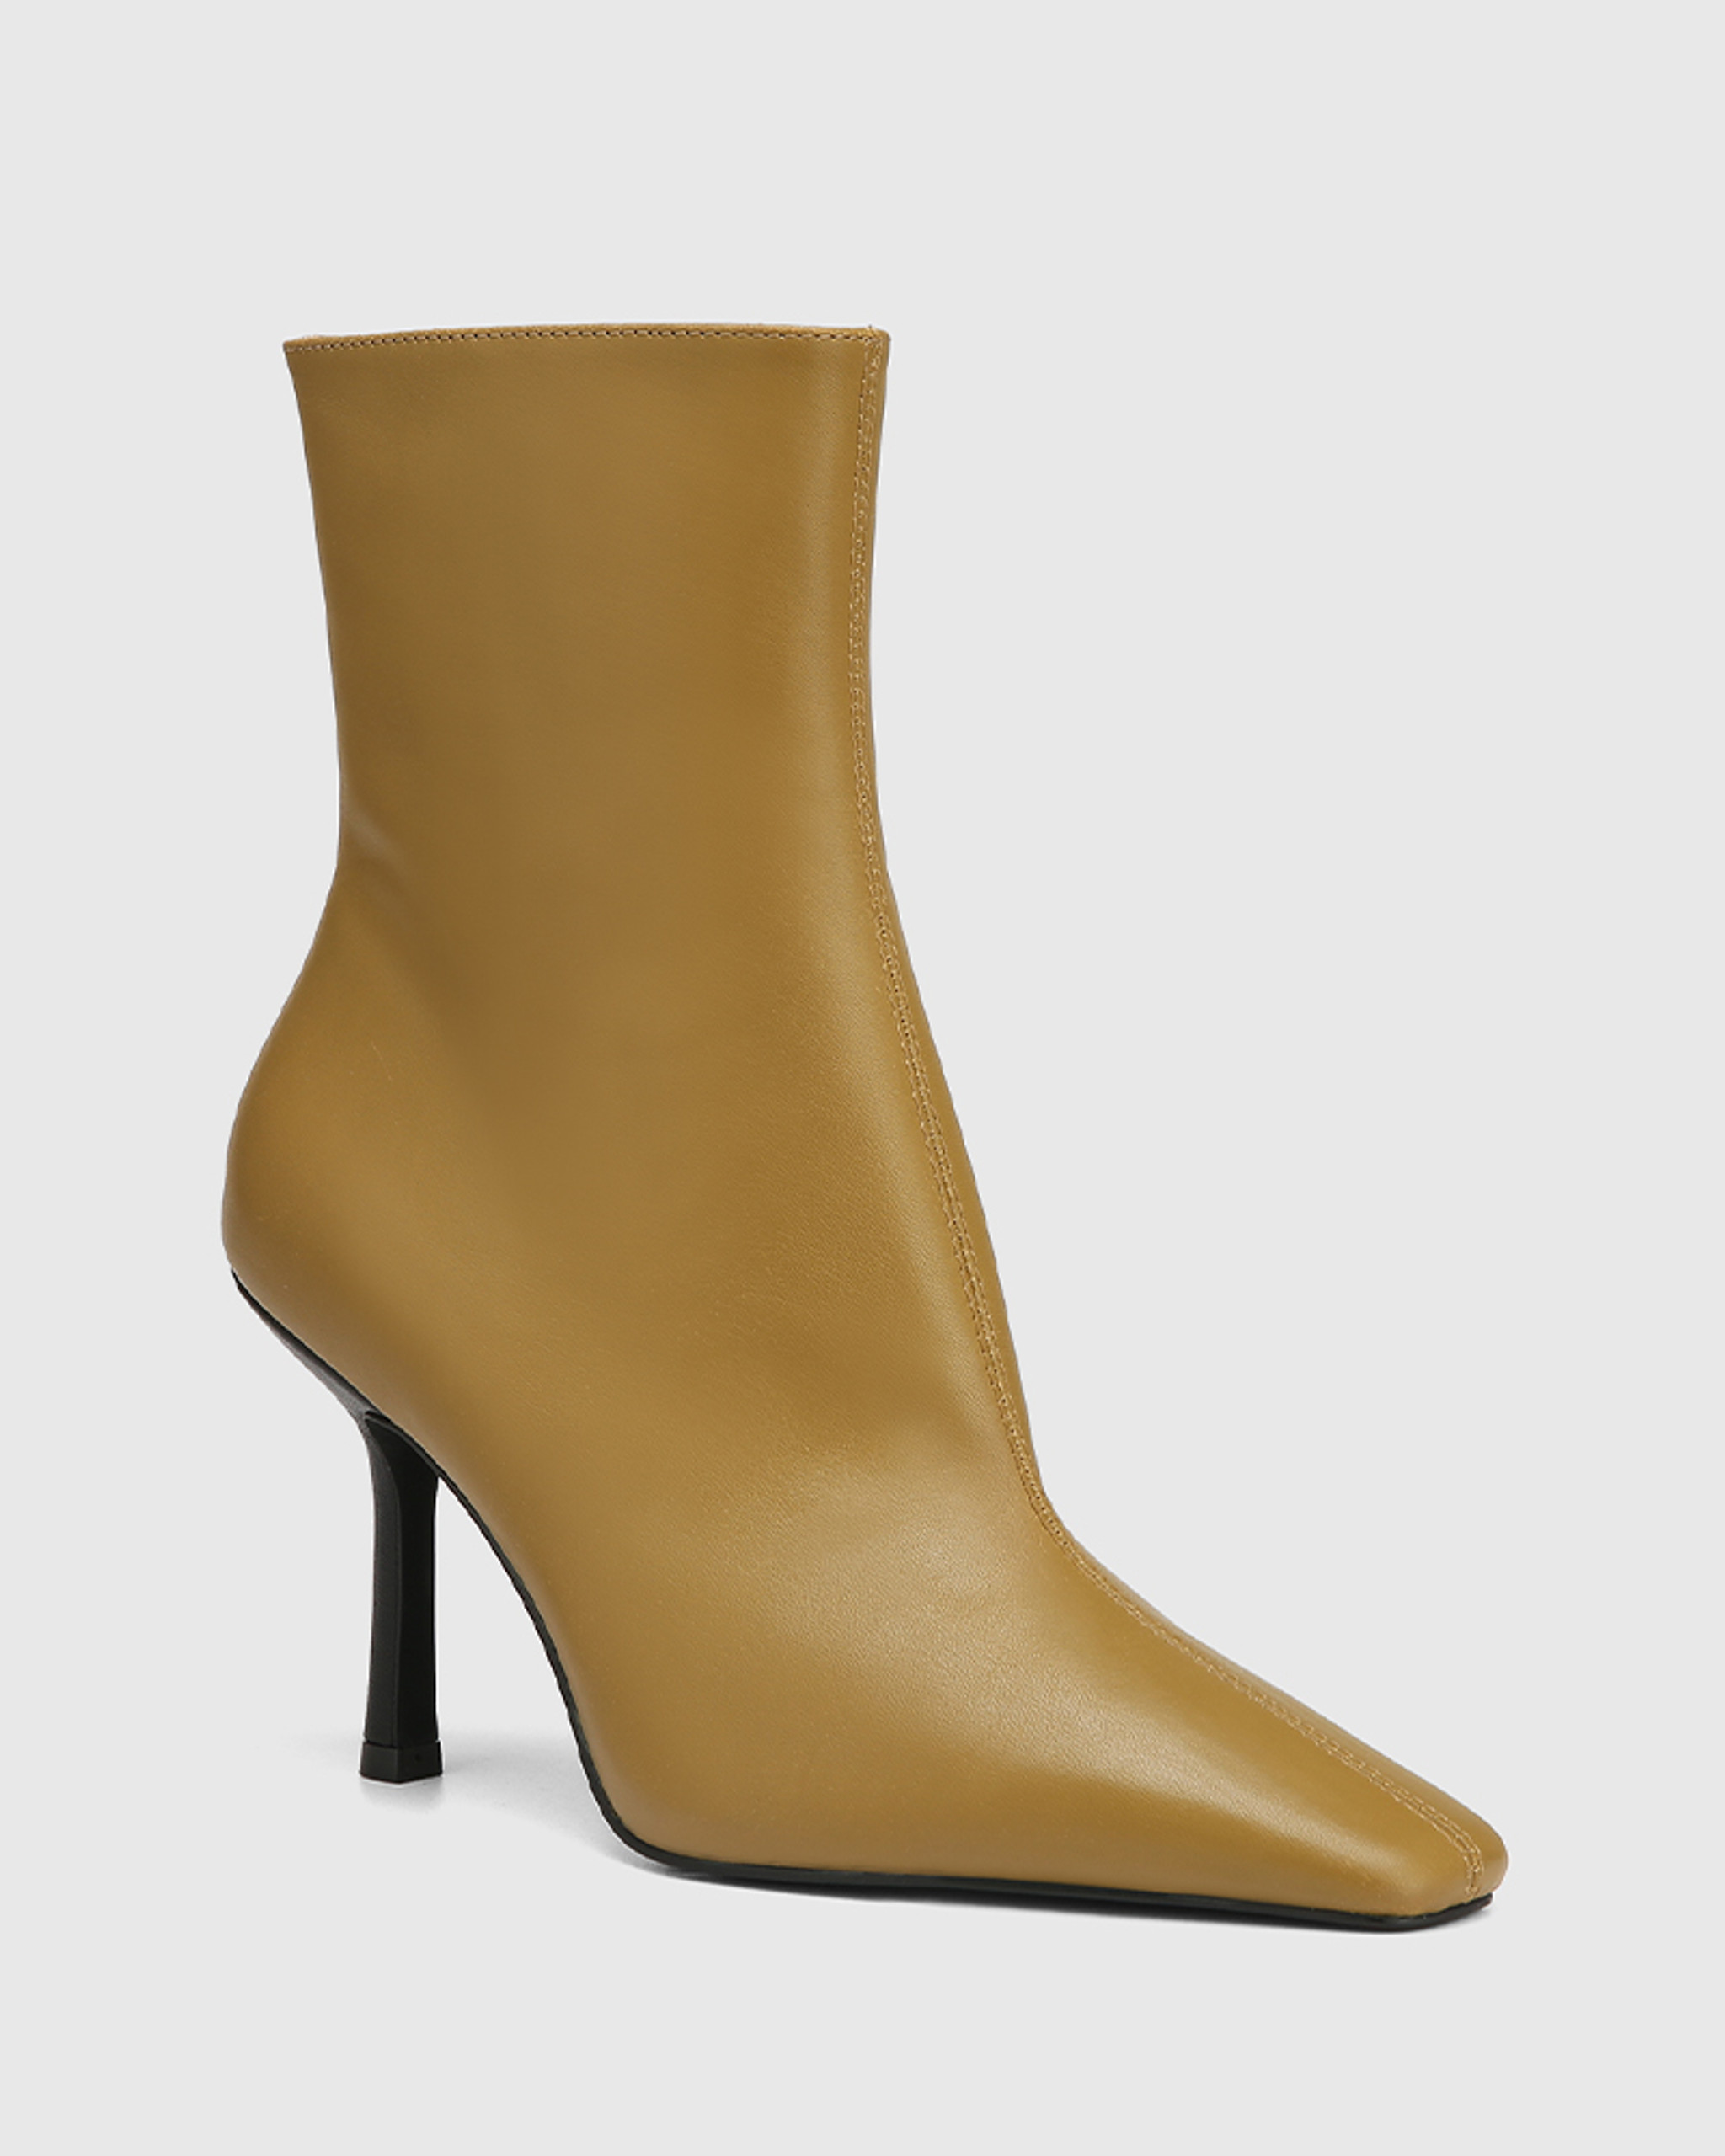 Elegant Pointed Toe Stiletto Stiletto Heel Ankle Boots For Women Lace Up, High  Heel, Short Booties In Yellow, Black, And Army Green Available In Big Sizes  From Clstshoesale, $88 | DHgate.Com